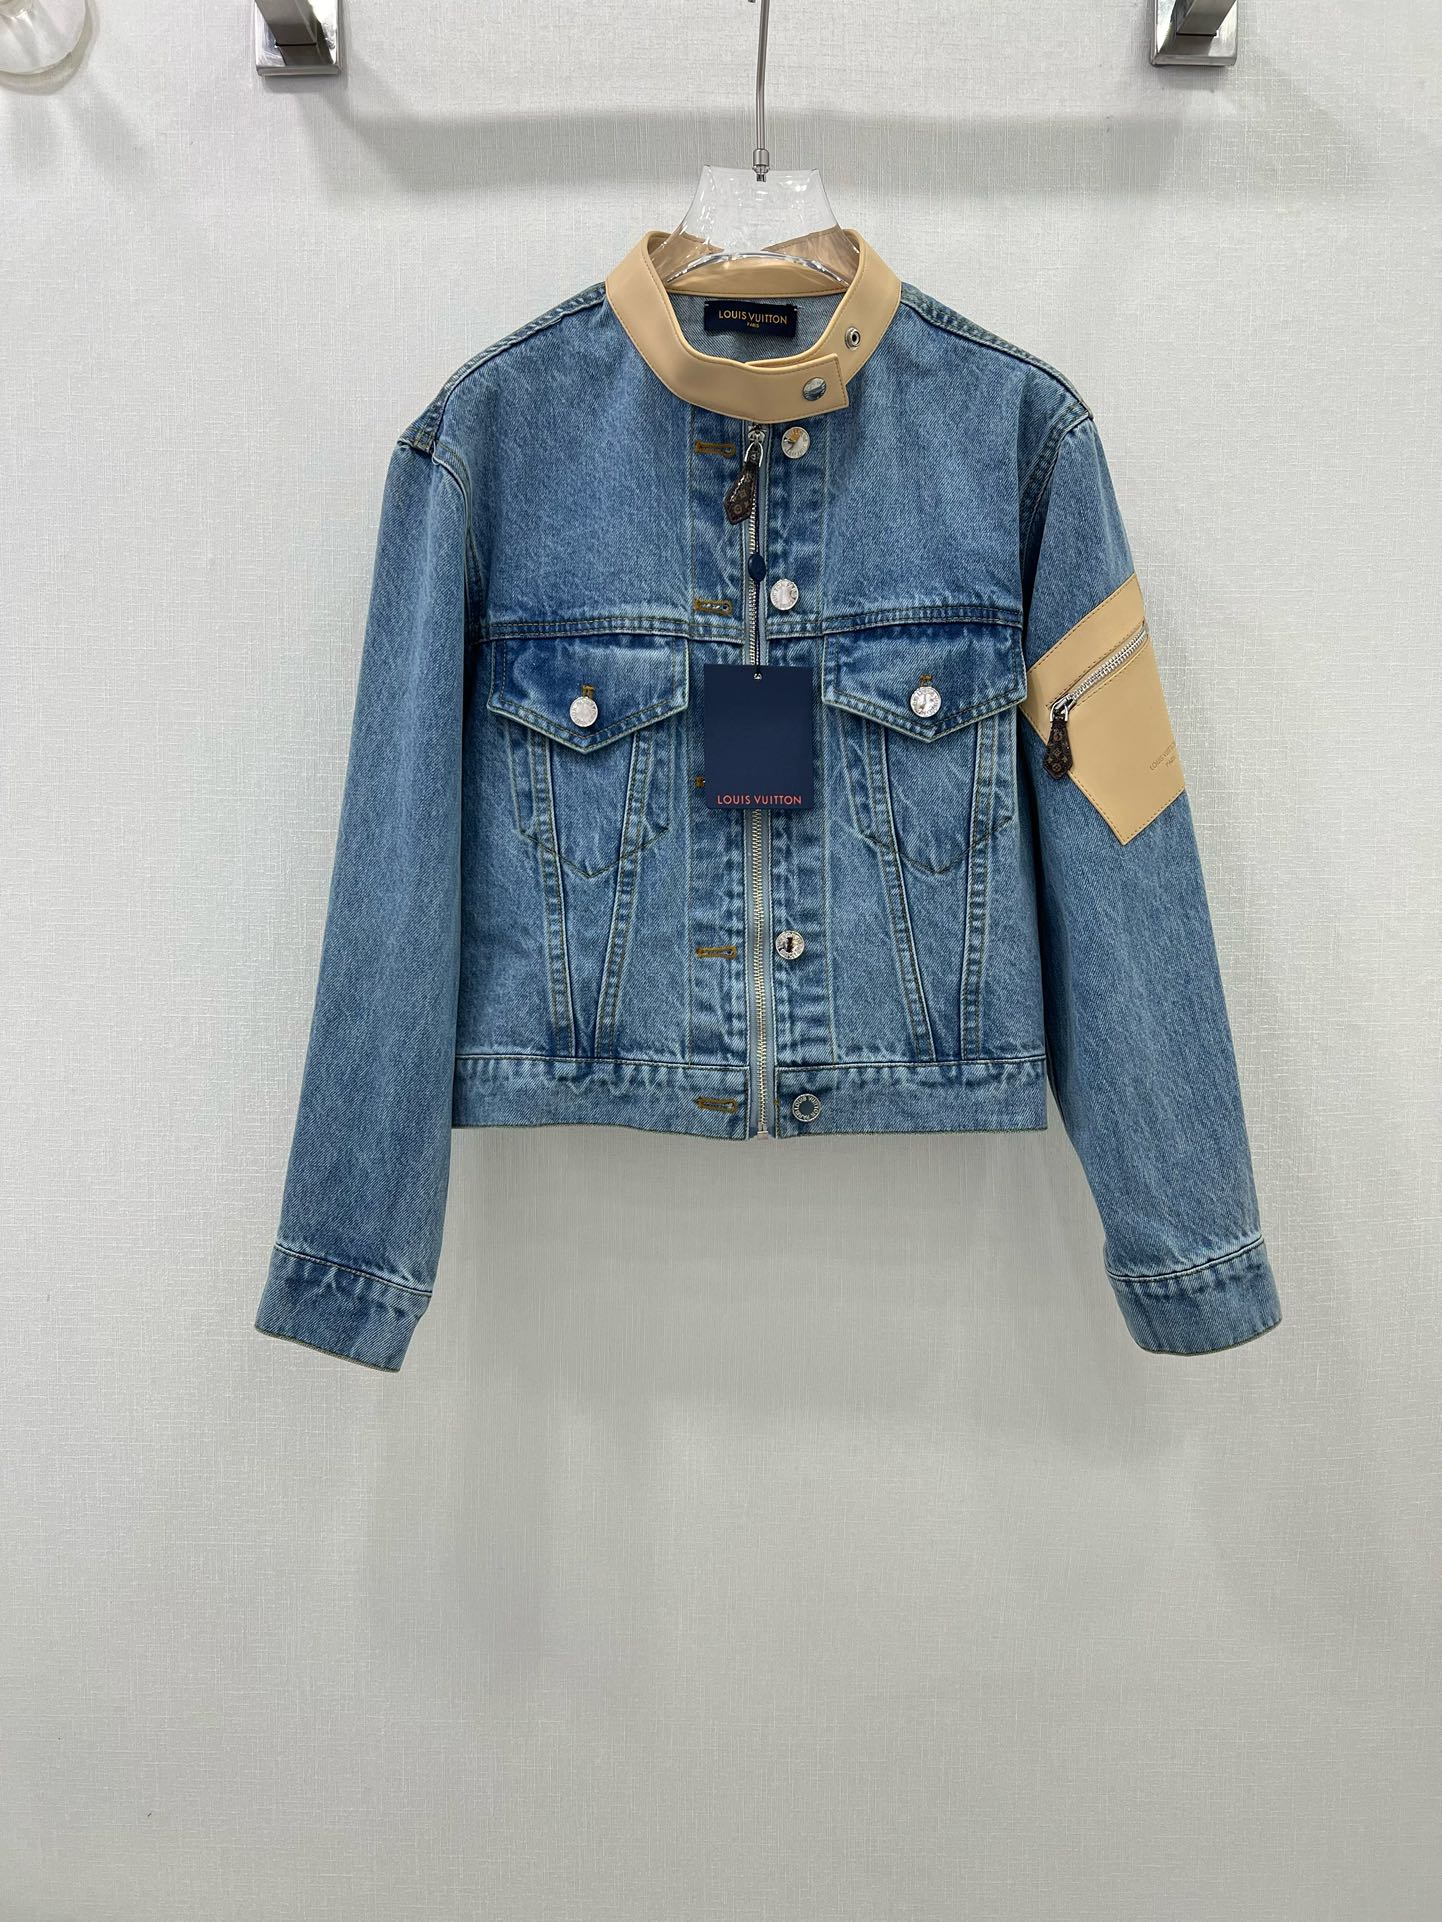 Louis Vuitton Clothing Coats & Jackets Denim Spring/Summer Collection Vintage